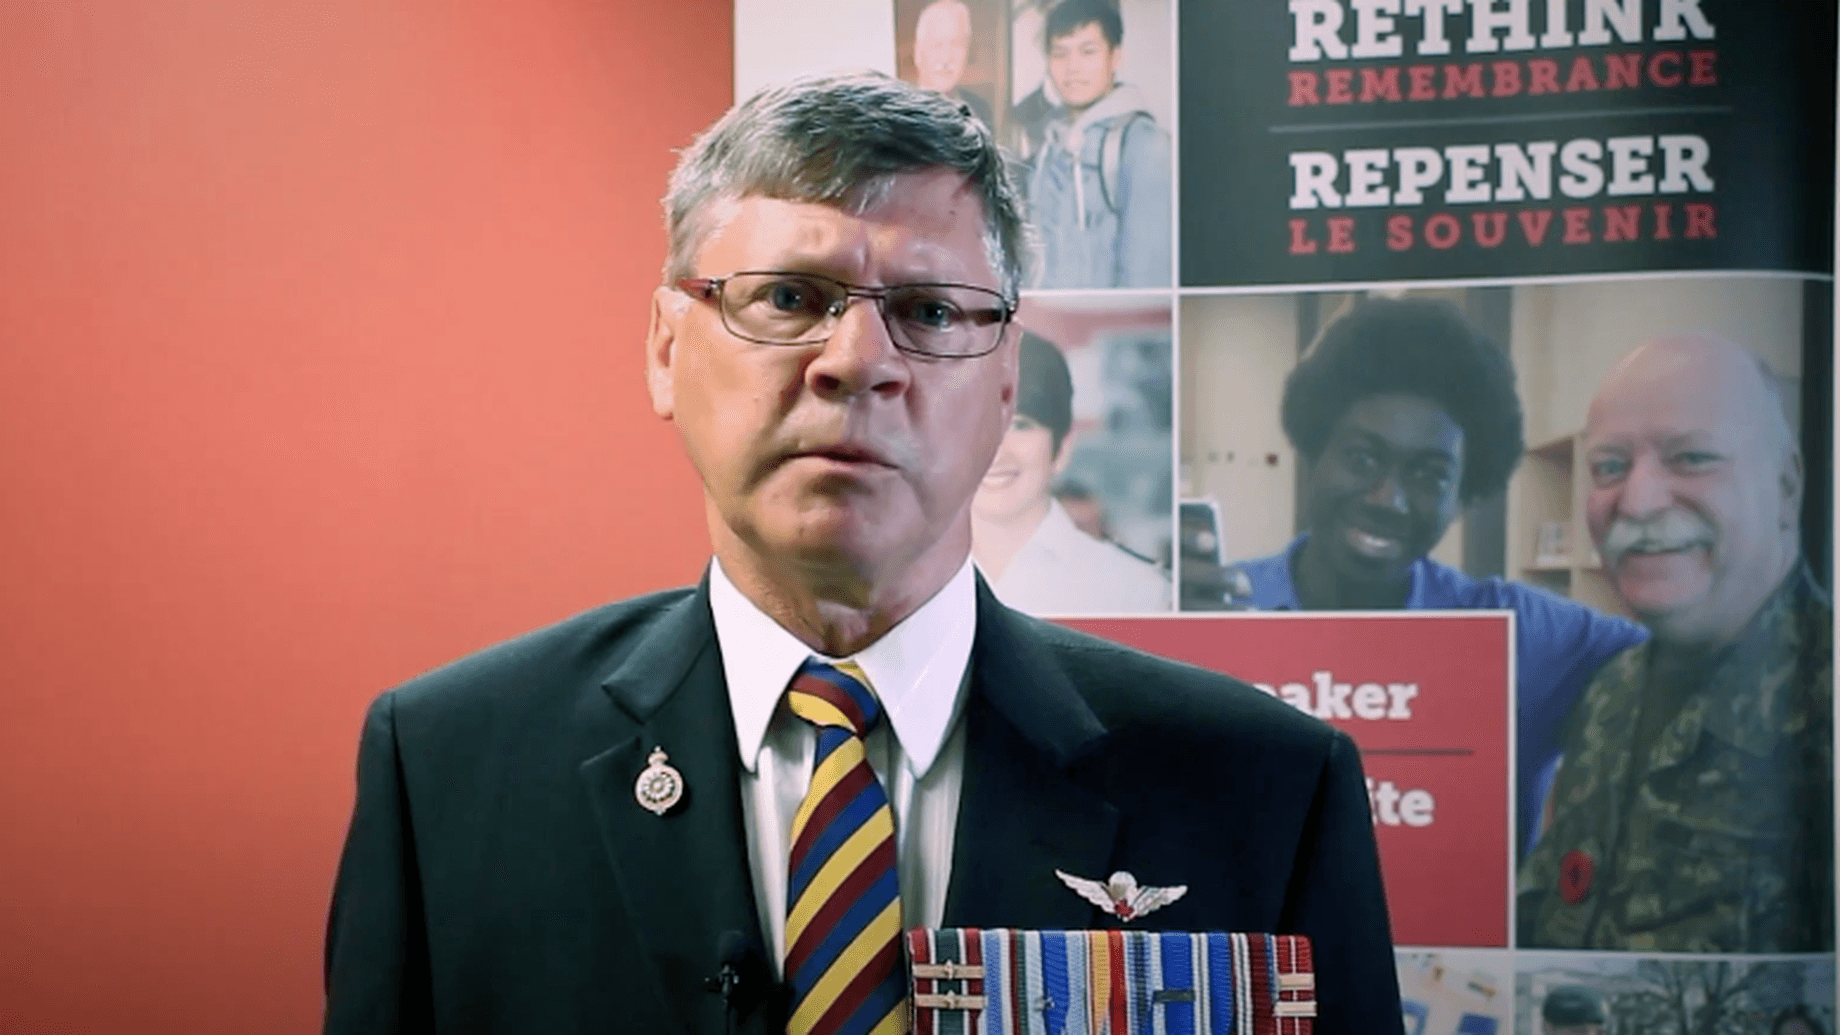 The Memory Project: Remembrance Day Address with Paul Hale